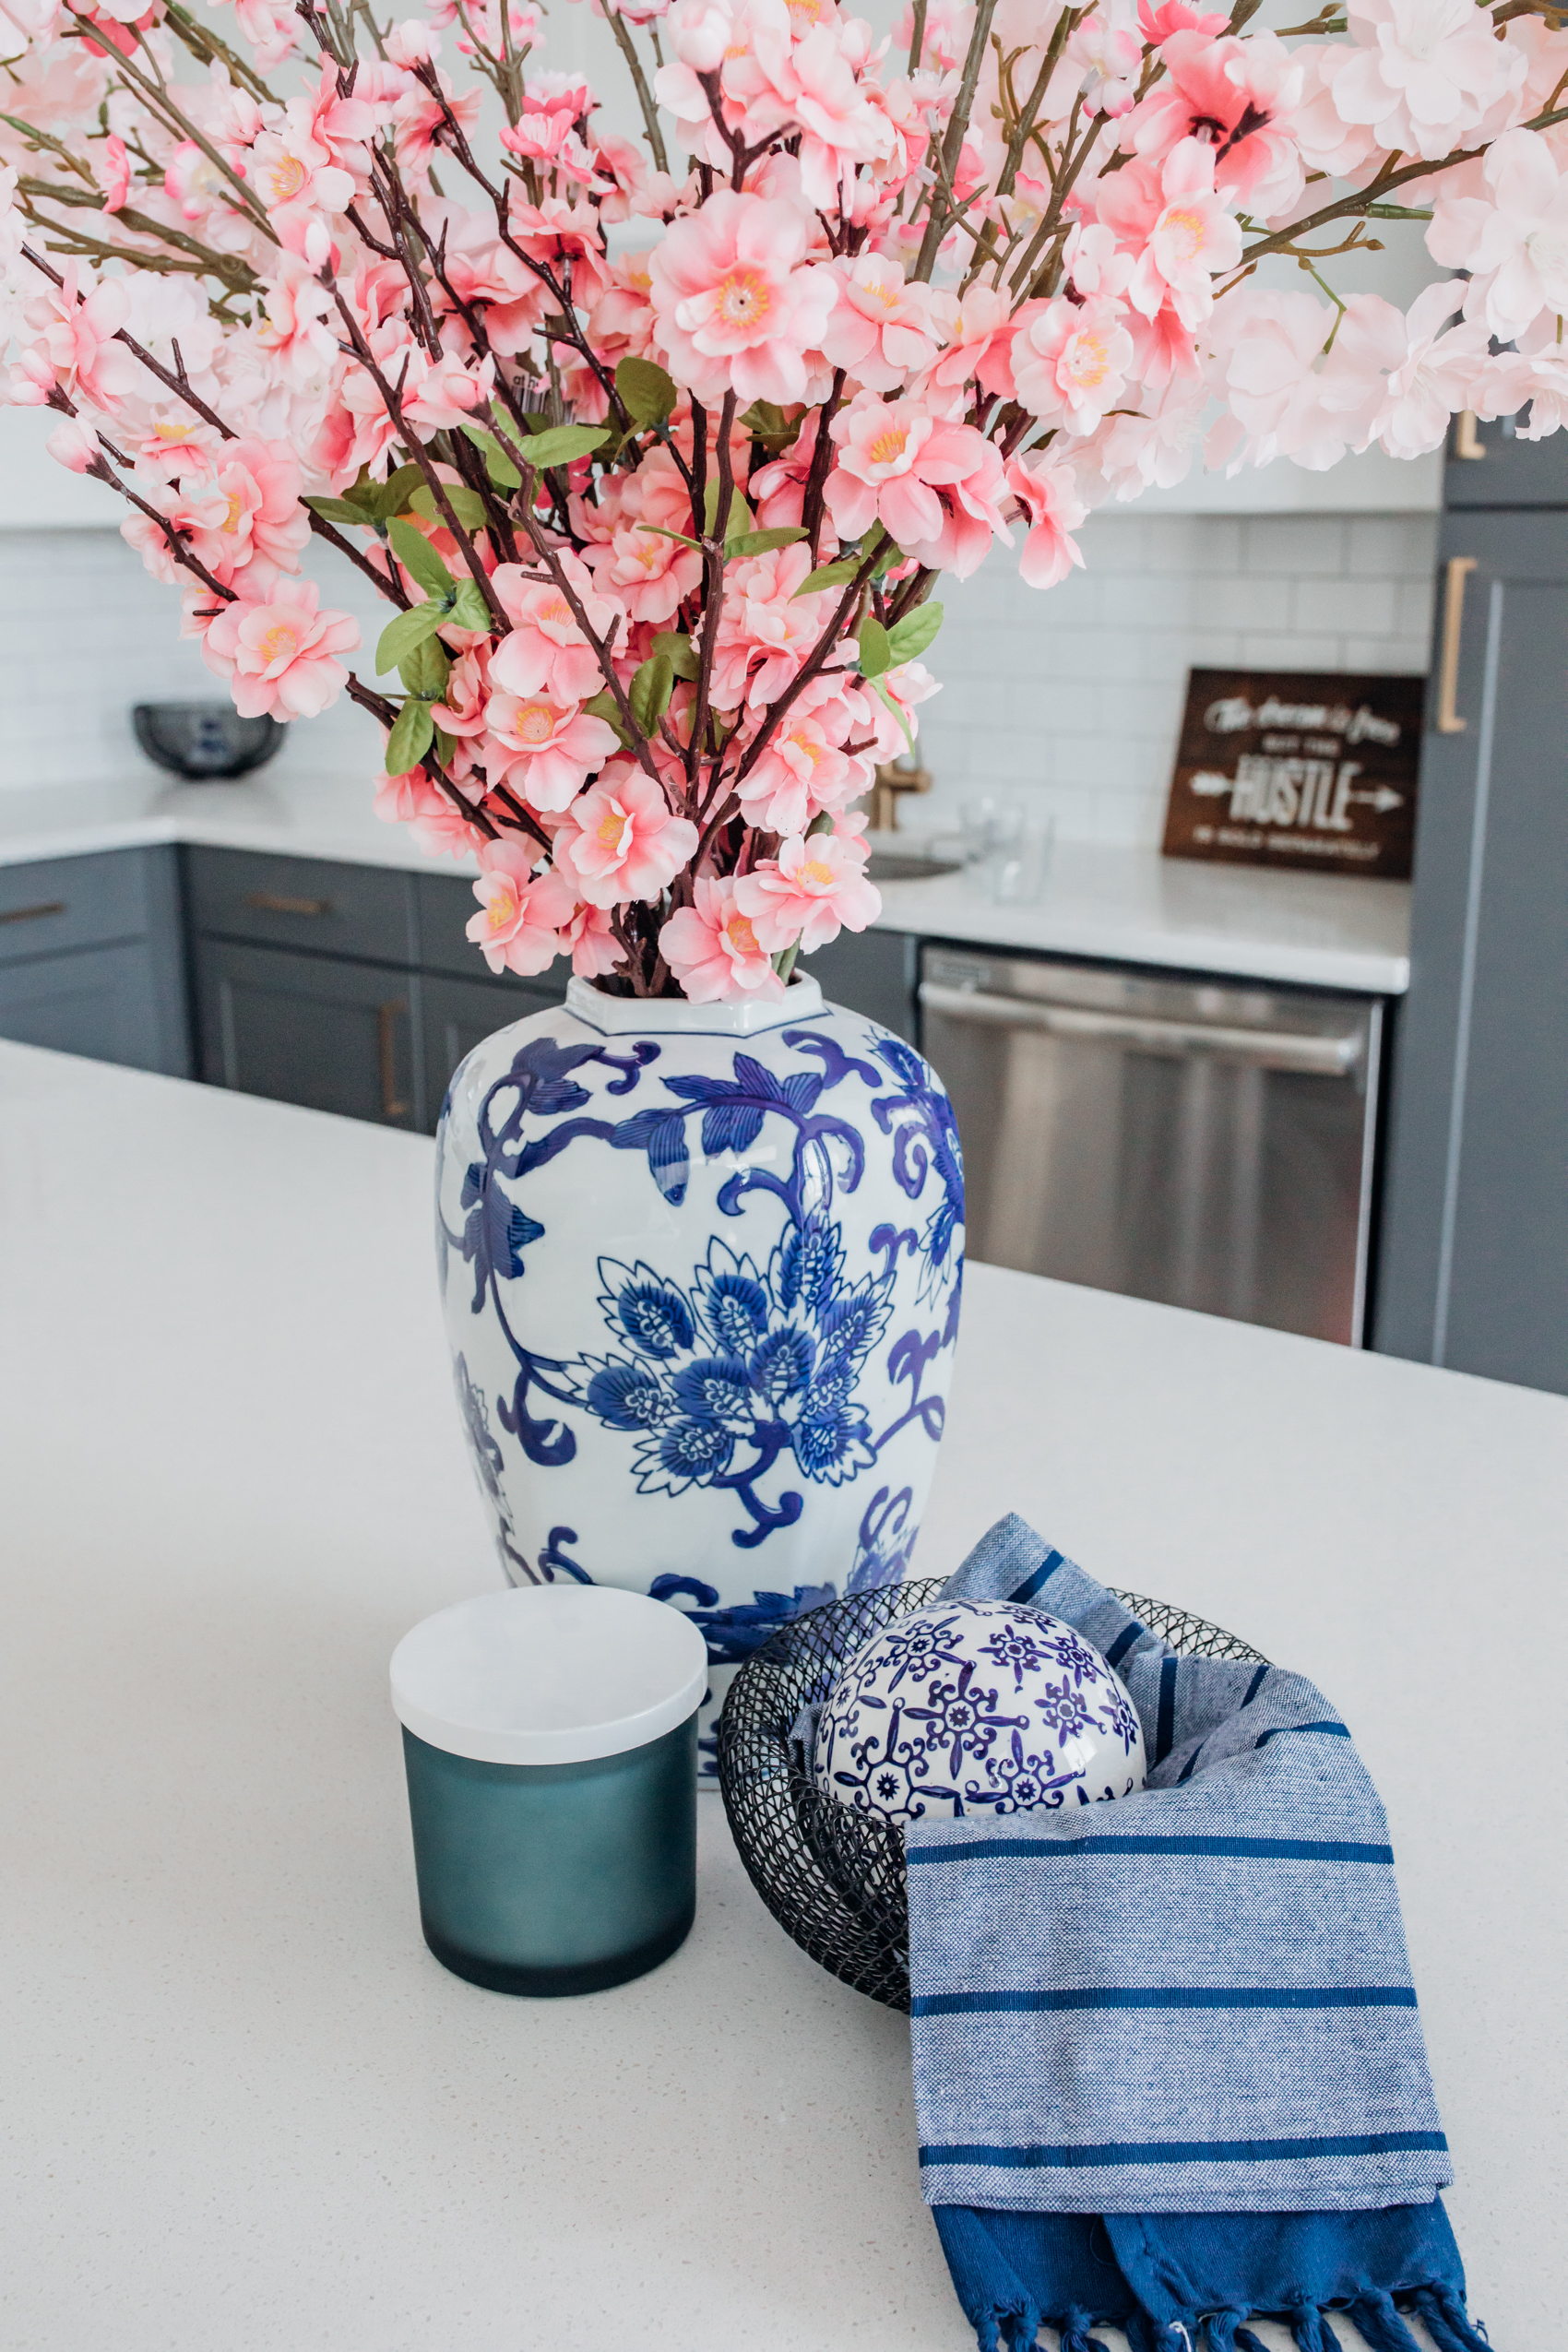 Spring home decor in a two-toned kitchen with a ginger jar, faux cherry blossoms, and black bowls